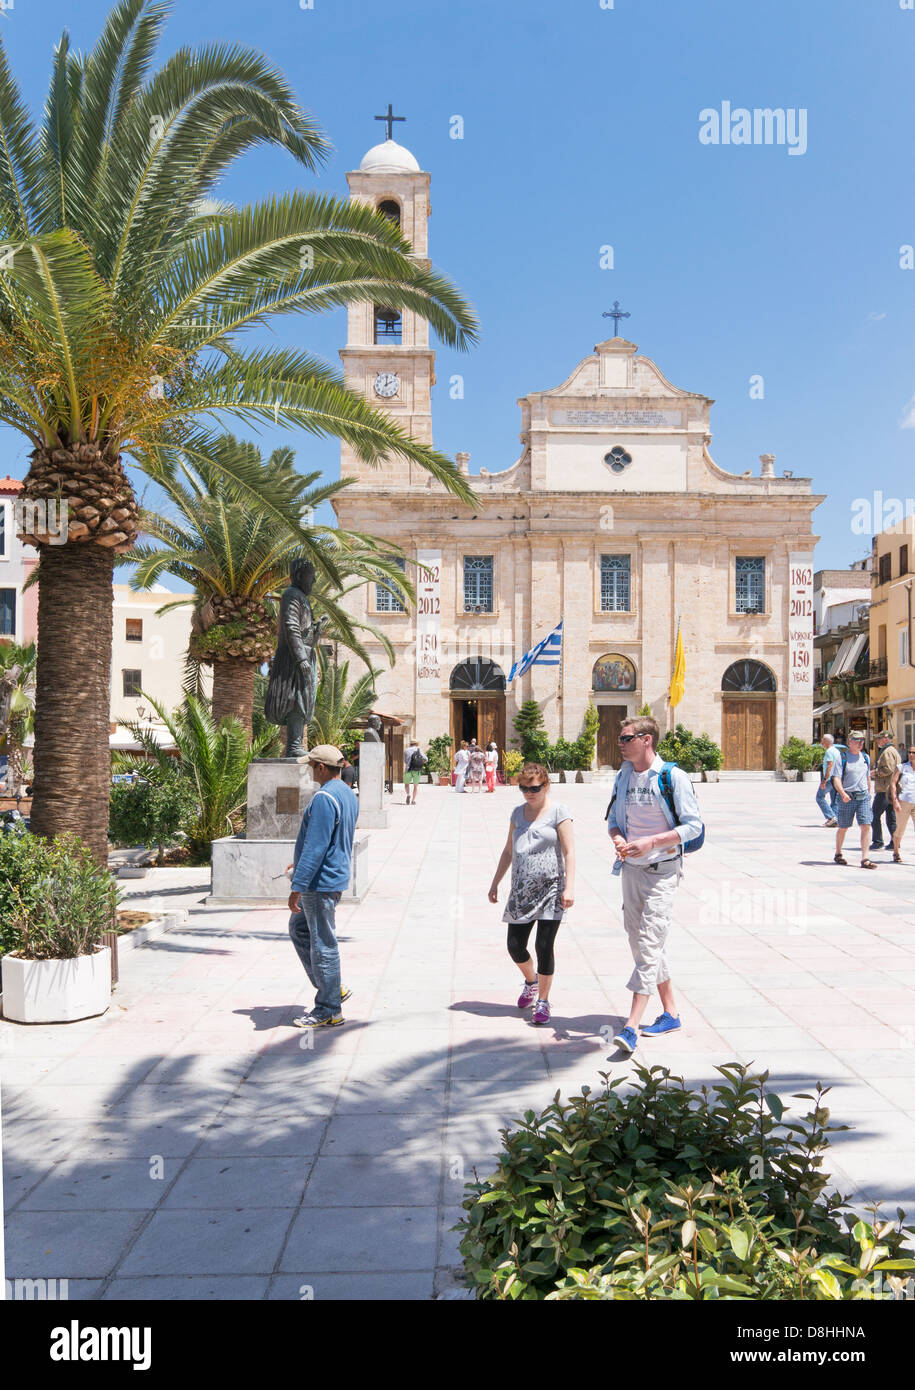 People walking across the square in front of Chania cathedral, Crete, Greece. Stock Photo